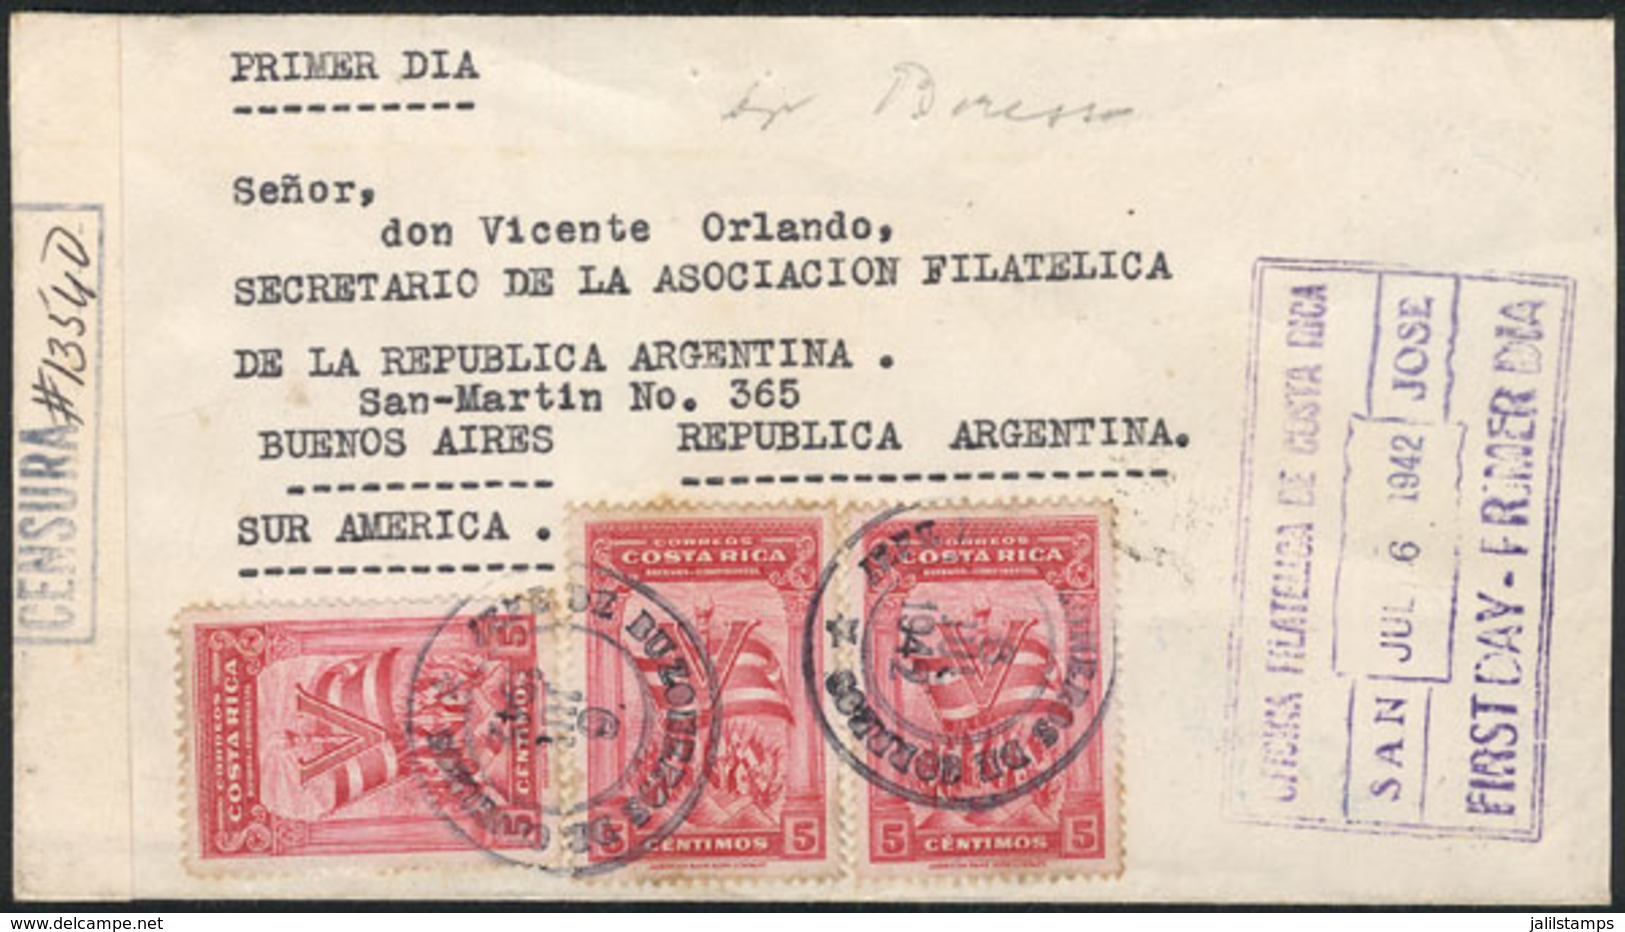 1133 COSTA RICA: FDC Cover Sent From San José To Argentina On 6/JUL/1942, With Censor Label At Left, Very Nice! - Costa Rica